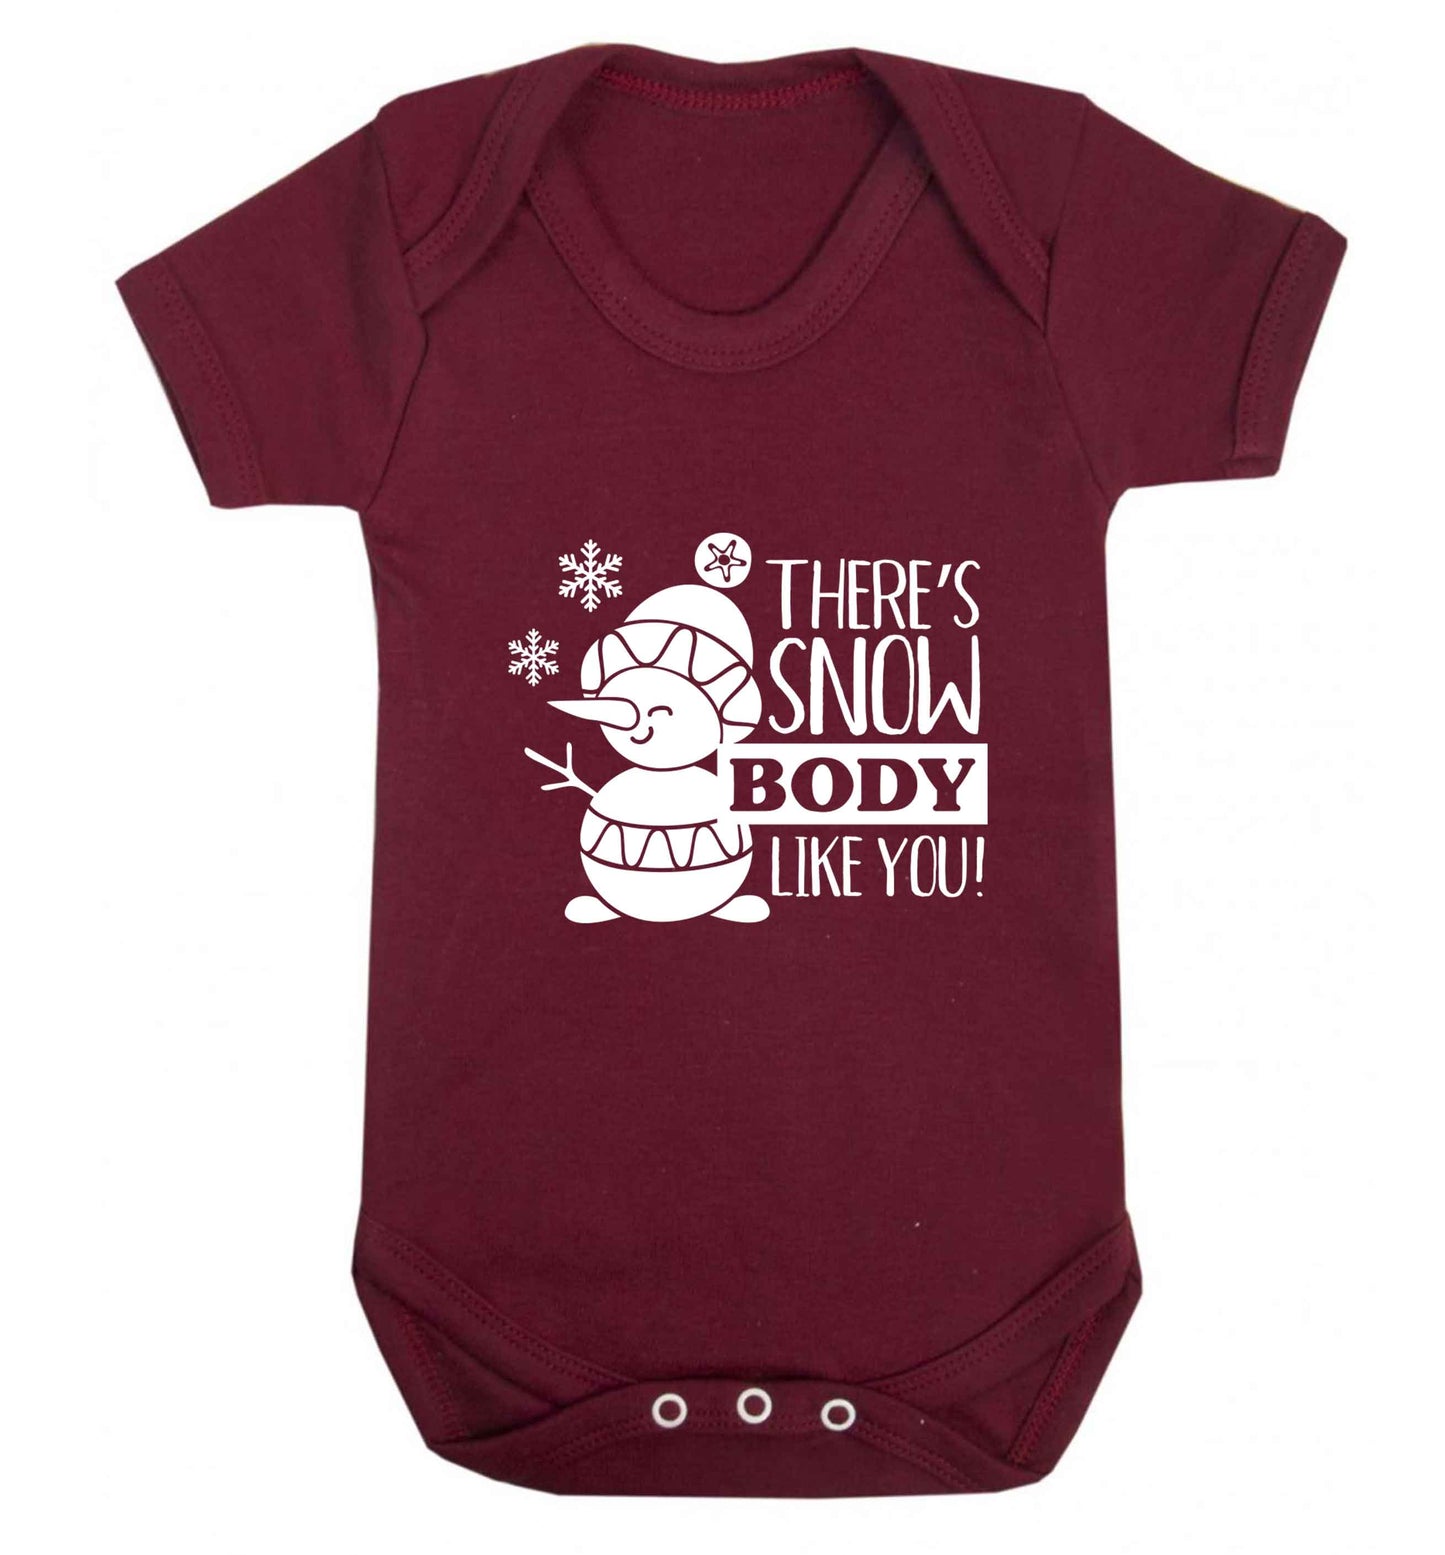 There's snow body like you baby vest maroon 18-24 months